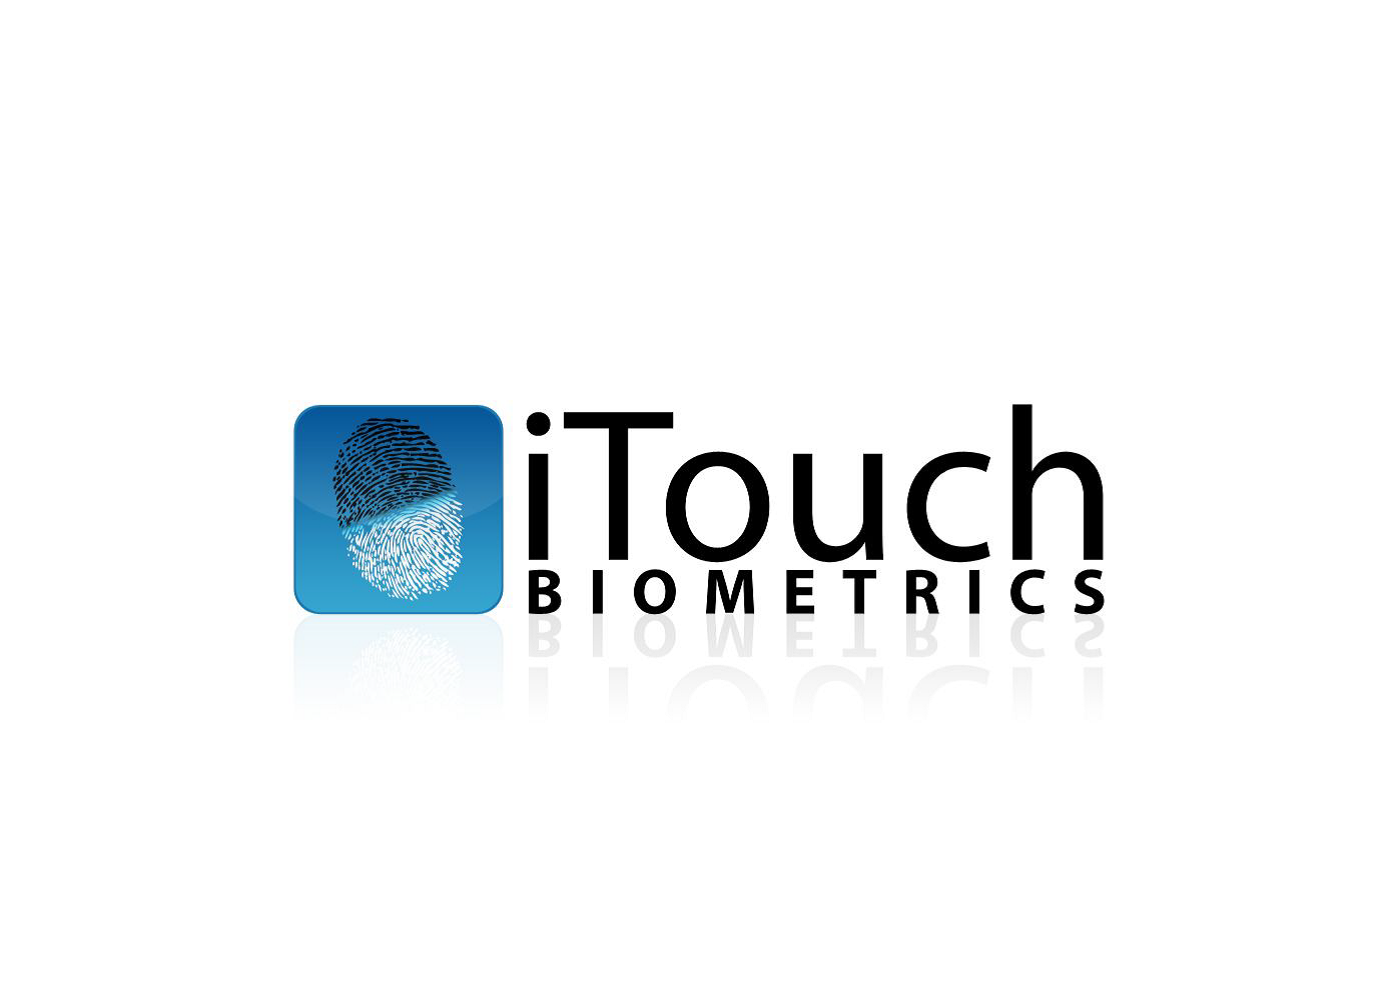 We are the market leader in the biometric space